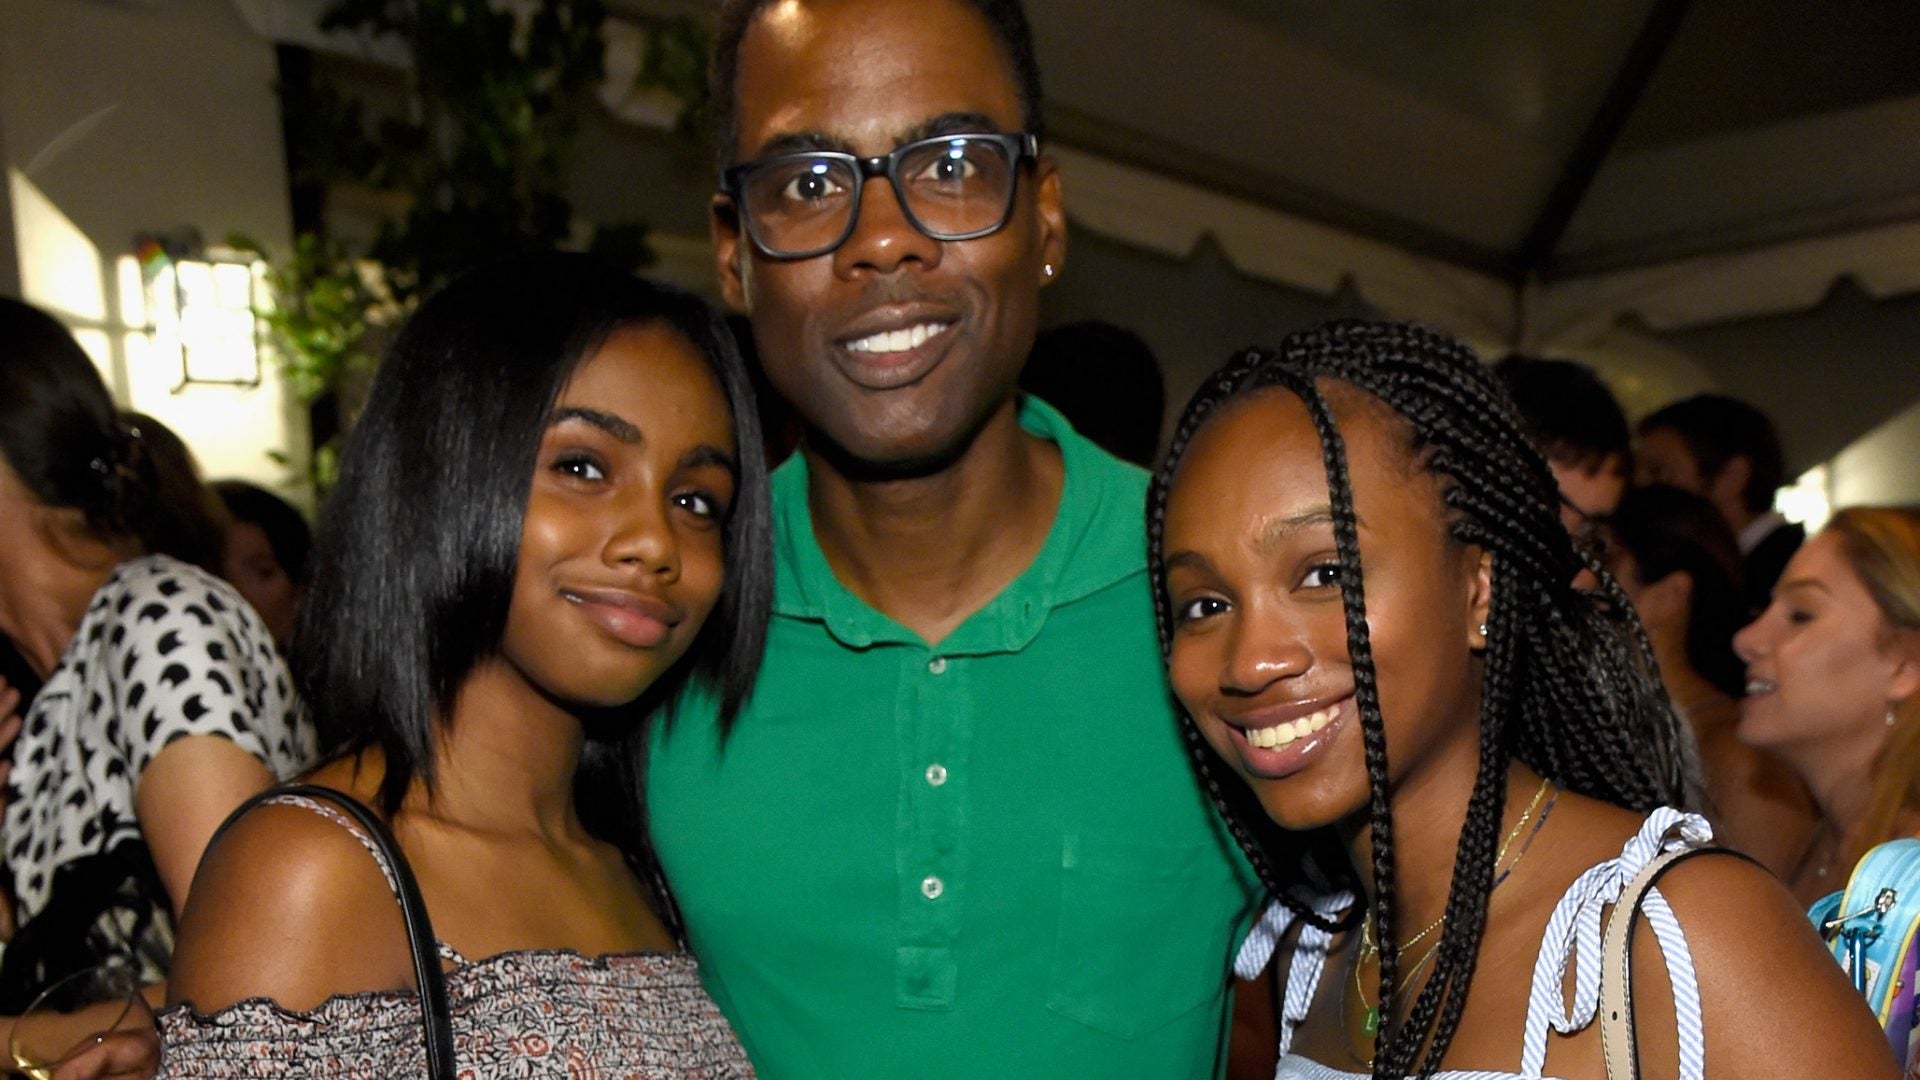 Chris Rock Got His First Tattoo At 55 — With His Daughter